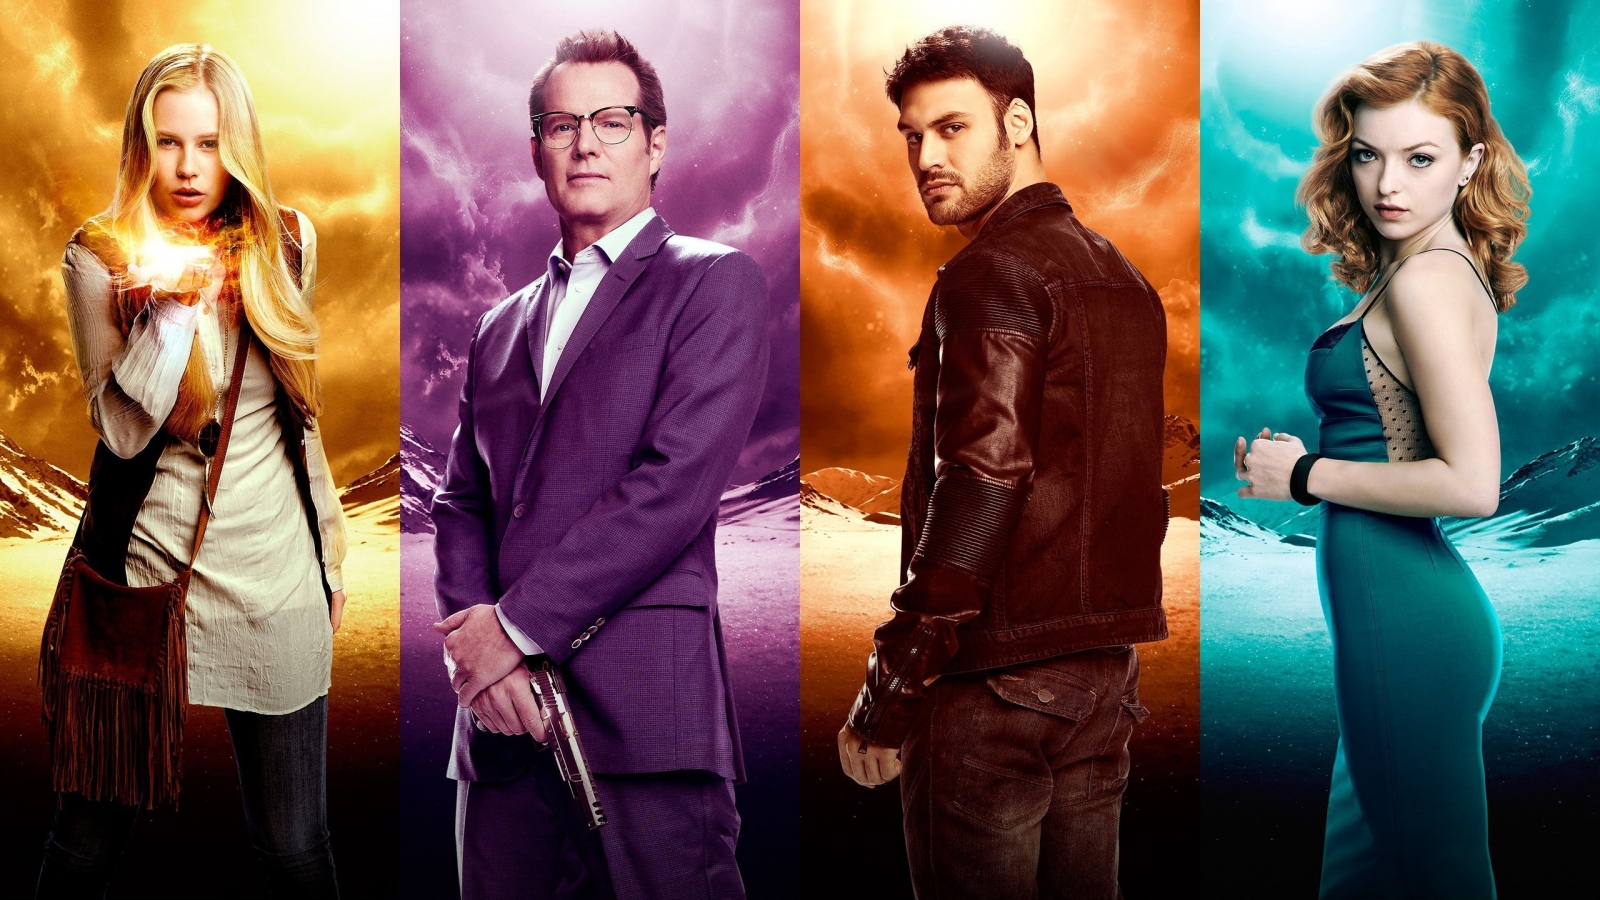 Heroes Reborn Cast for 1600 x 900 HDTV resolution